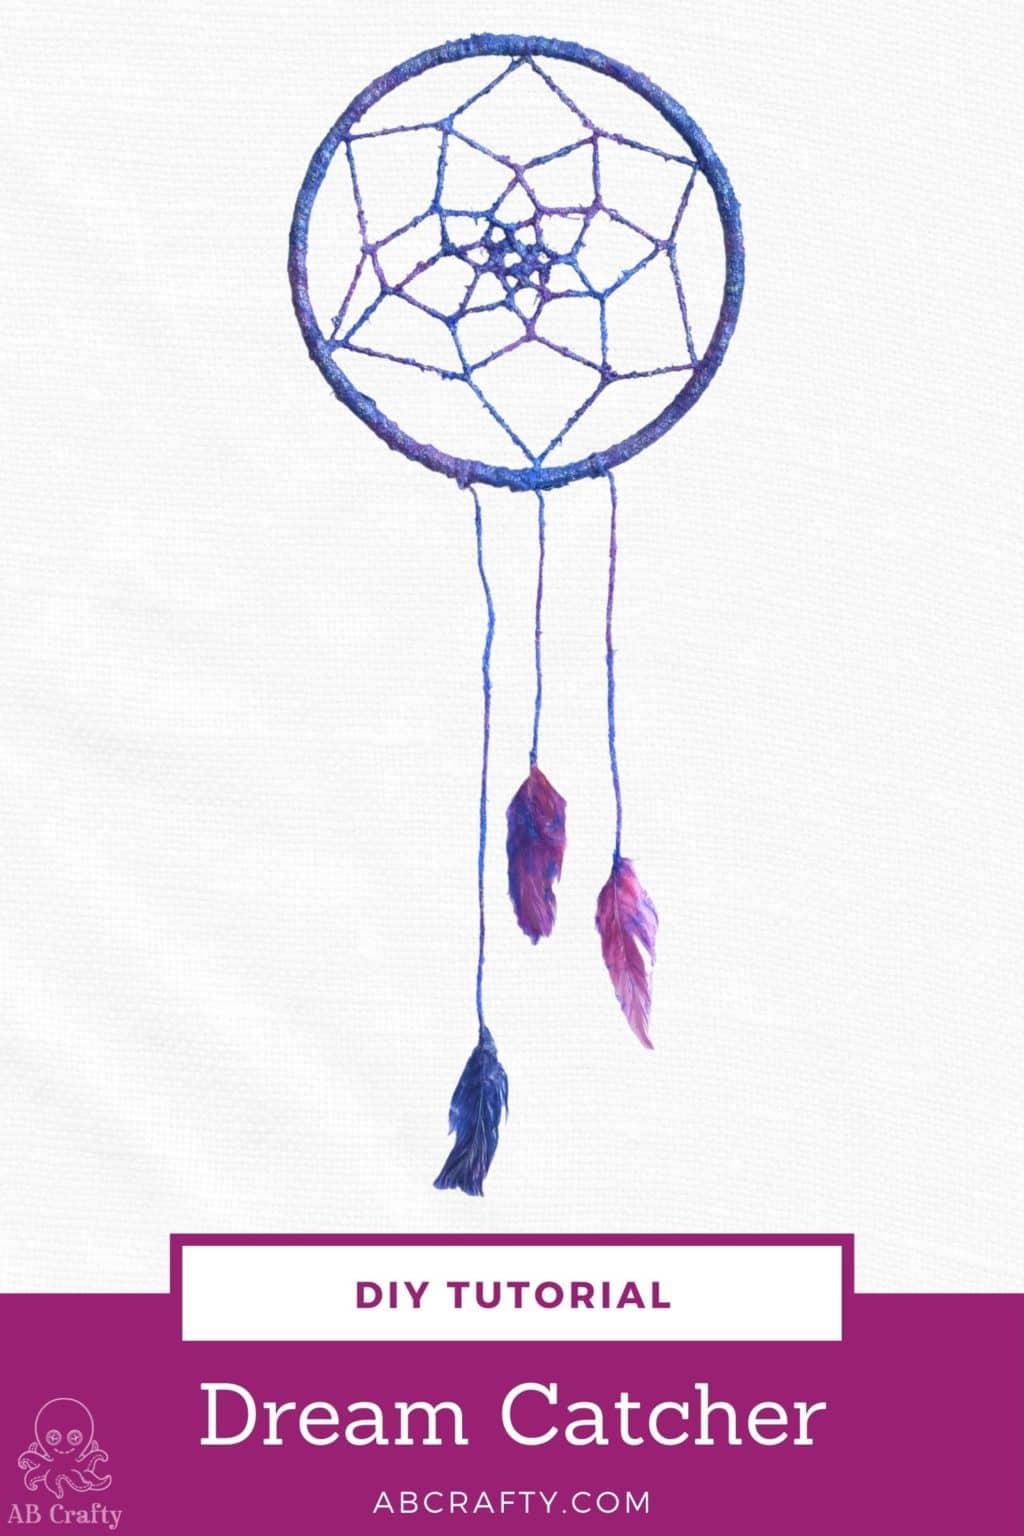 finished galaxy dream catcher with blue, purple, and pink, and feathers. the title reads "diy tutorial - dream catcher, abcrafty.com"